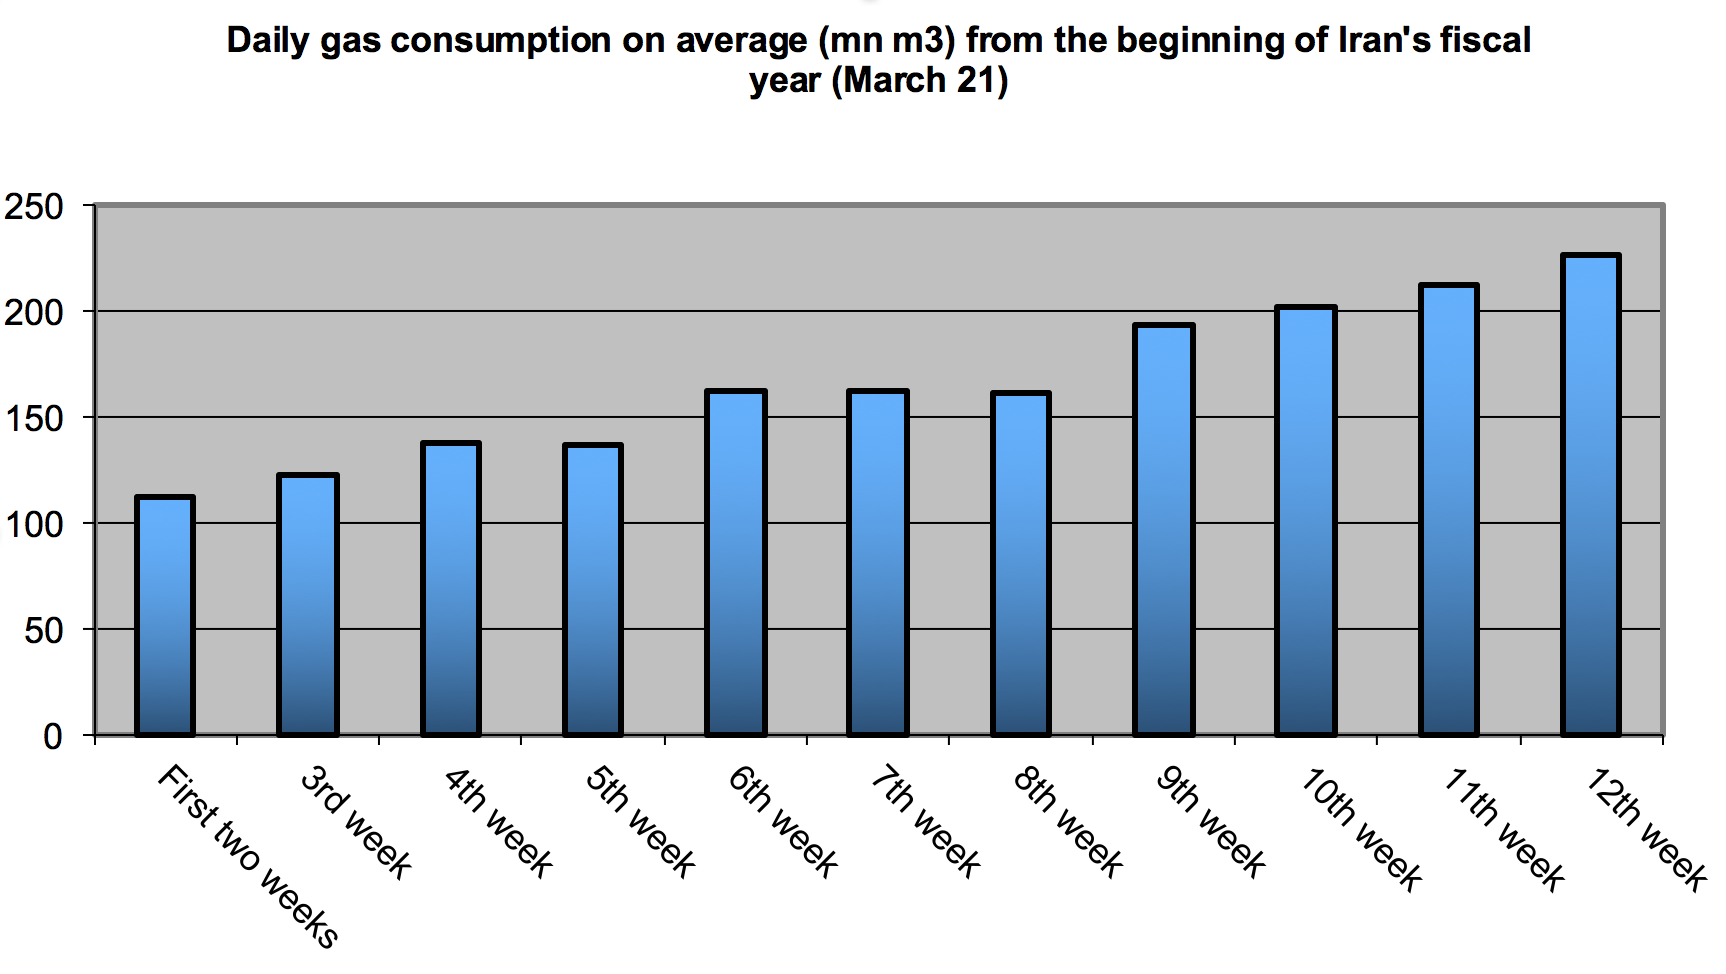 Daily gas consumption on average (mn m3) from the beginning of Iran's fiscal year (March 21)